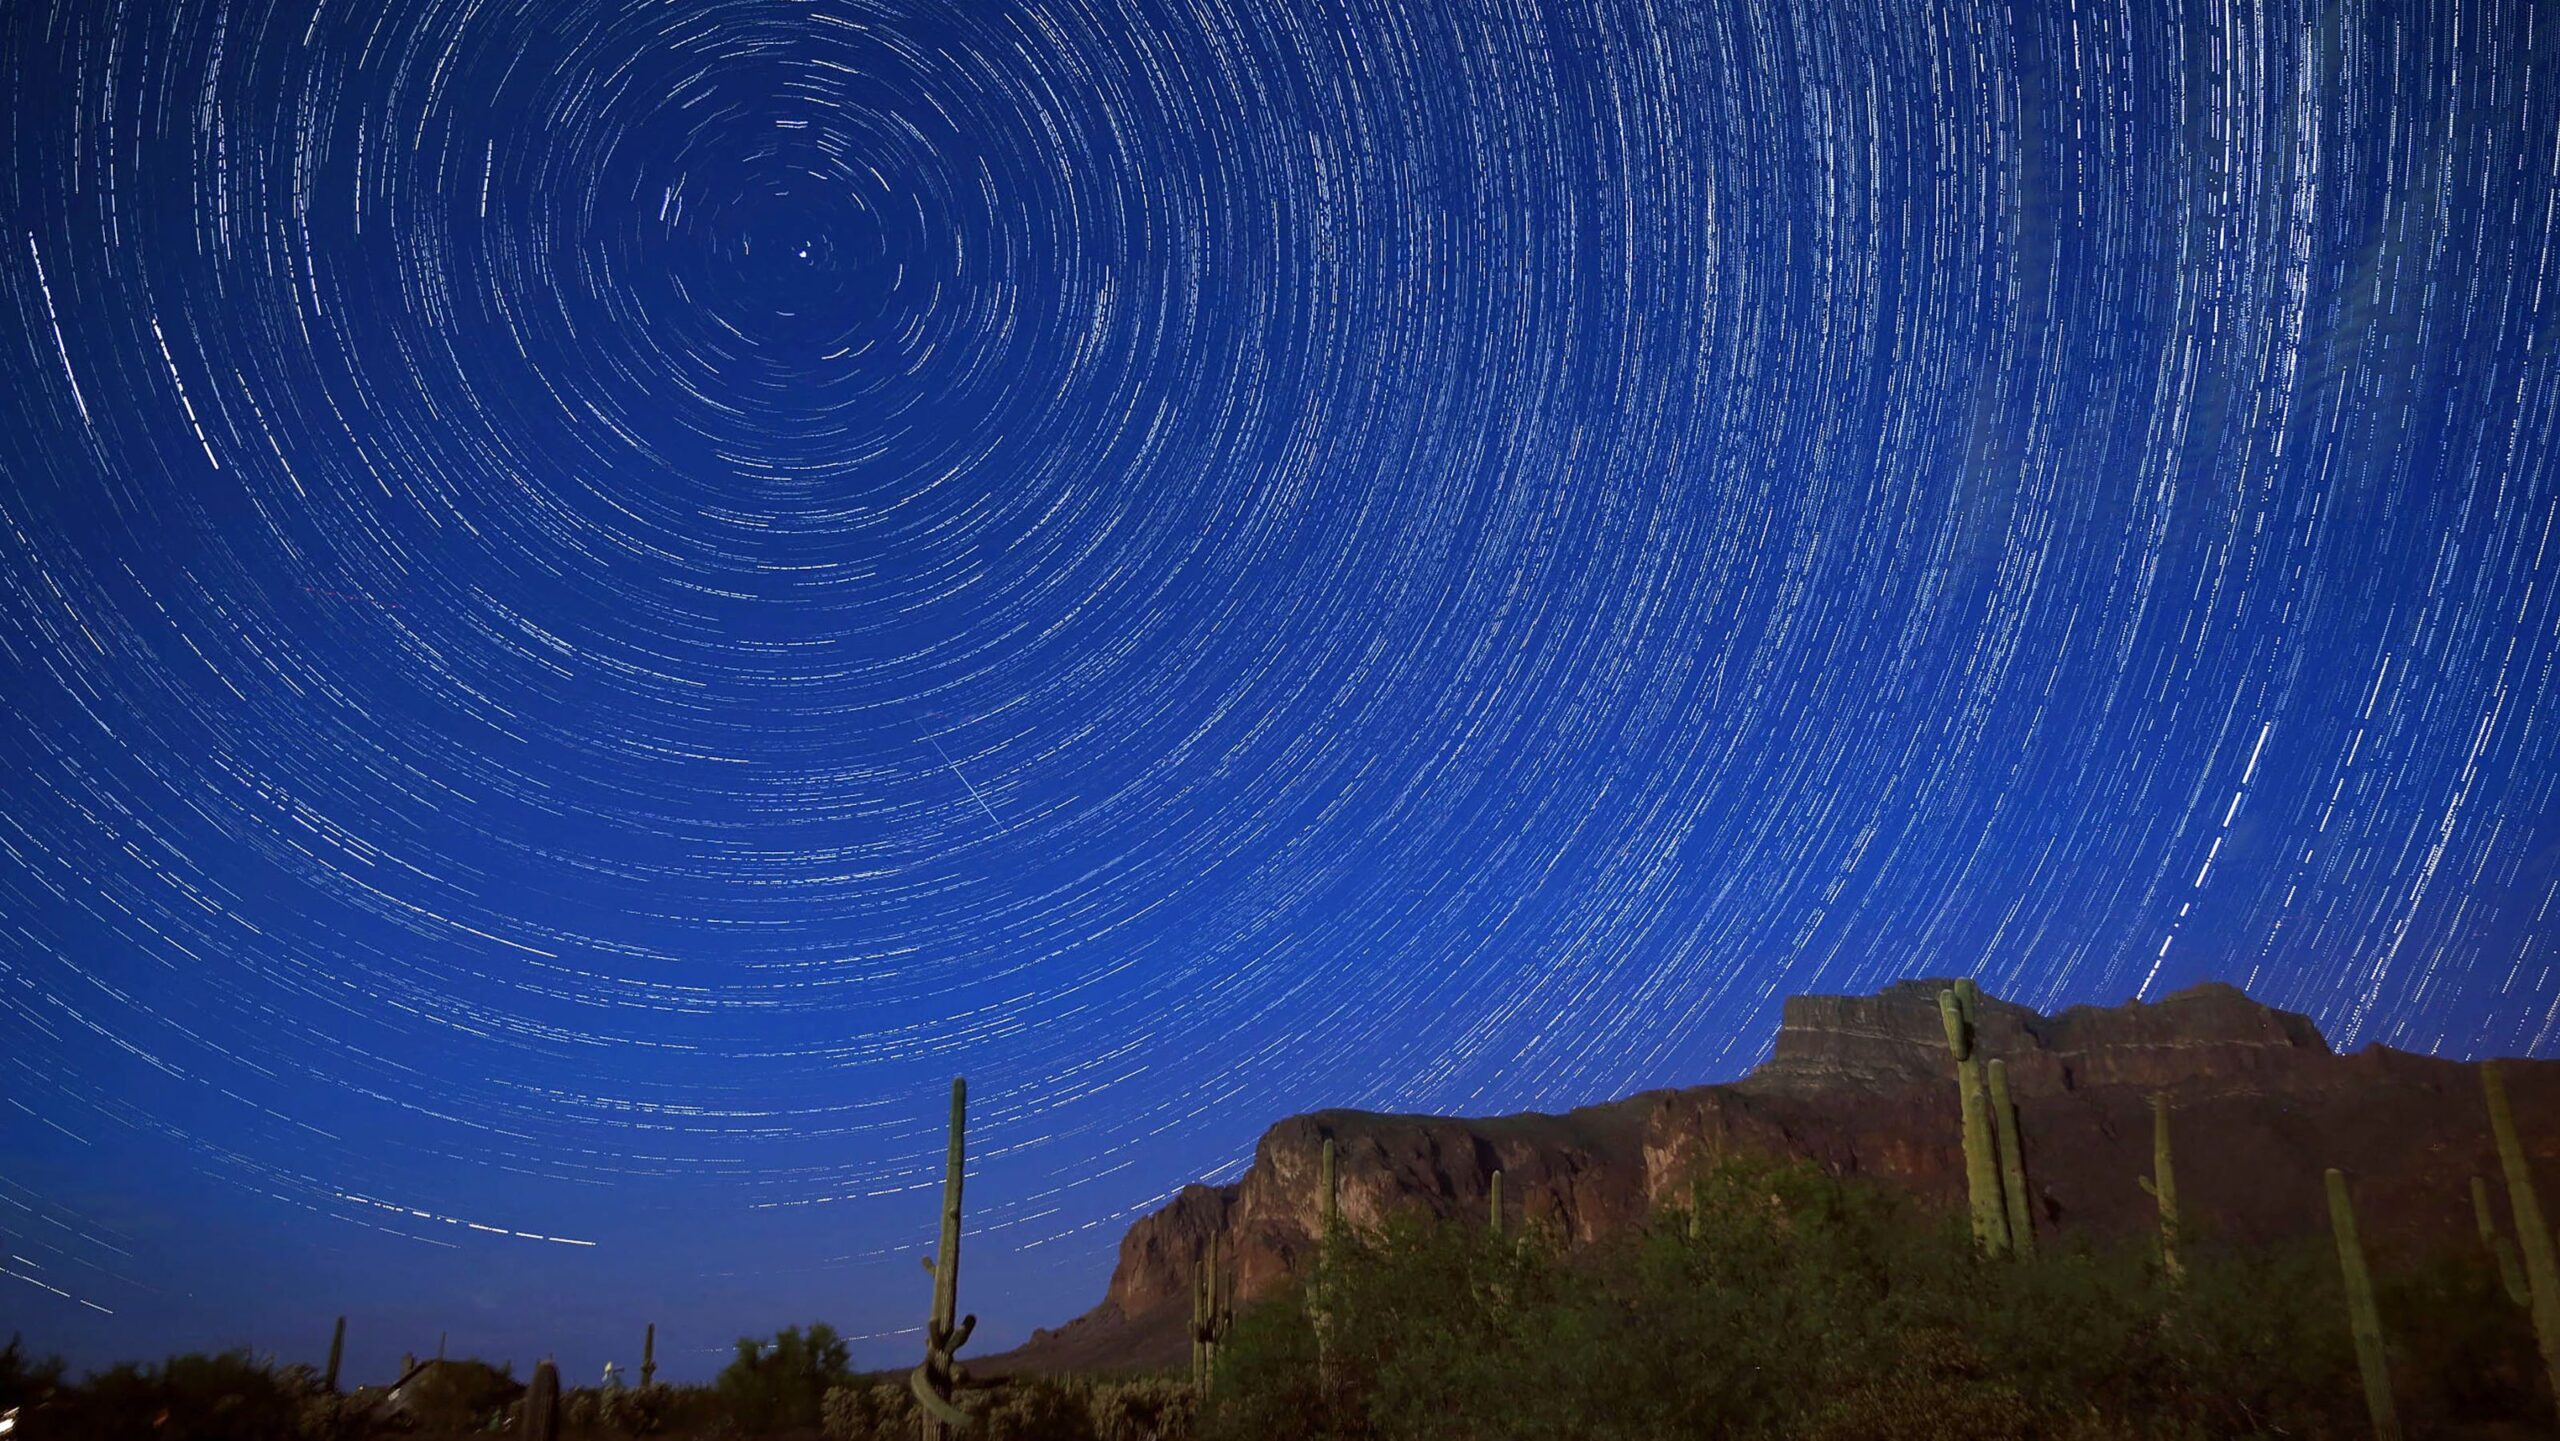 Discover the Spectacular Meteor Shower Show Happening This Weekend - Don't Miss Out! 12